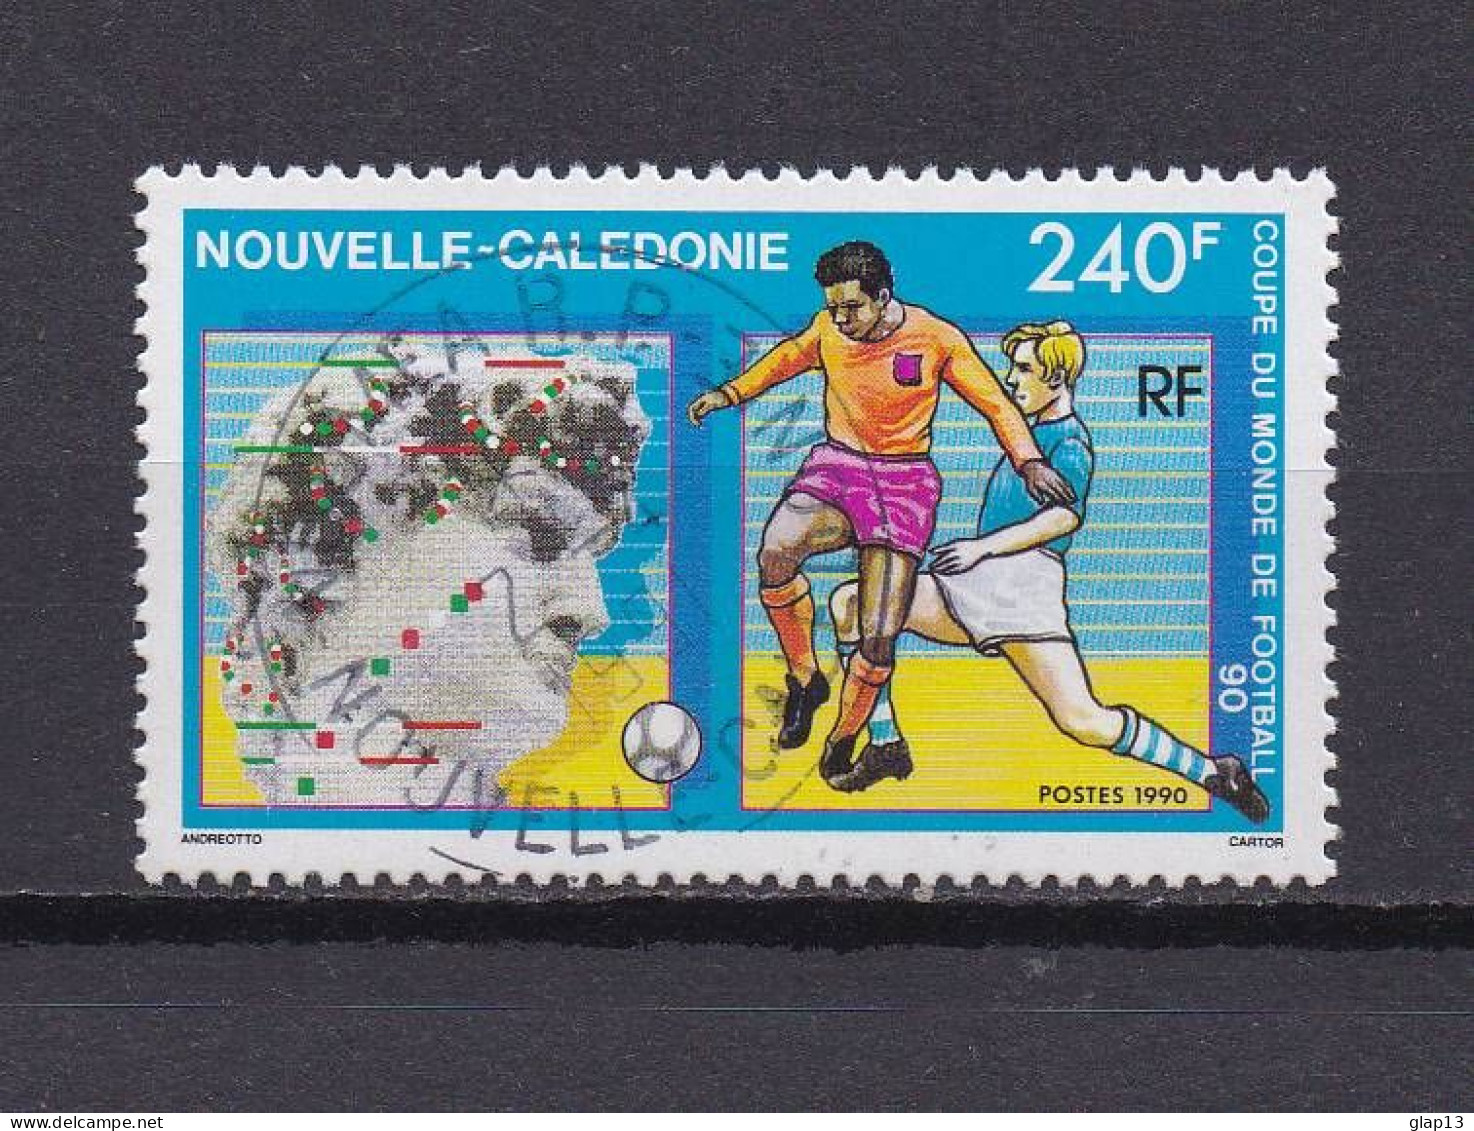 NOUVELLE-CALEDONIE 1990 TIMBRE N°596 OBLITERE FOOTBALL - Usati